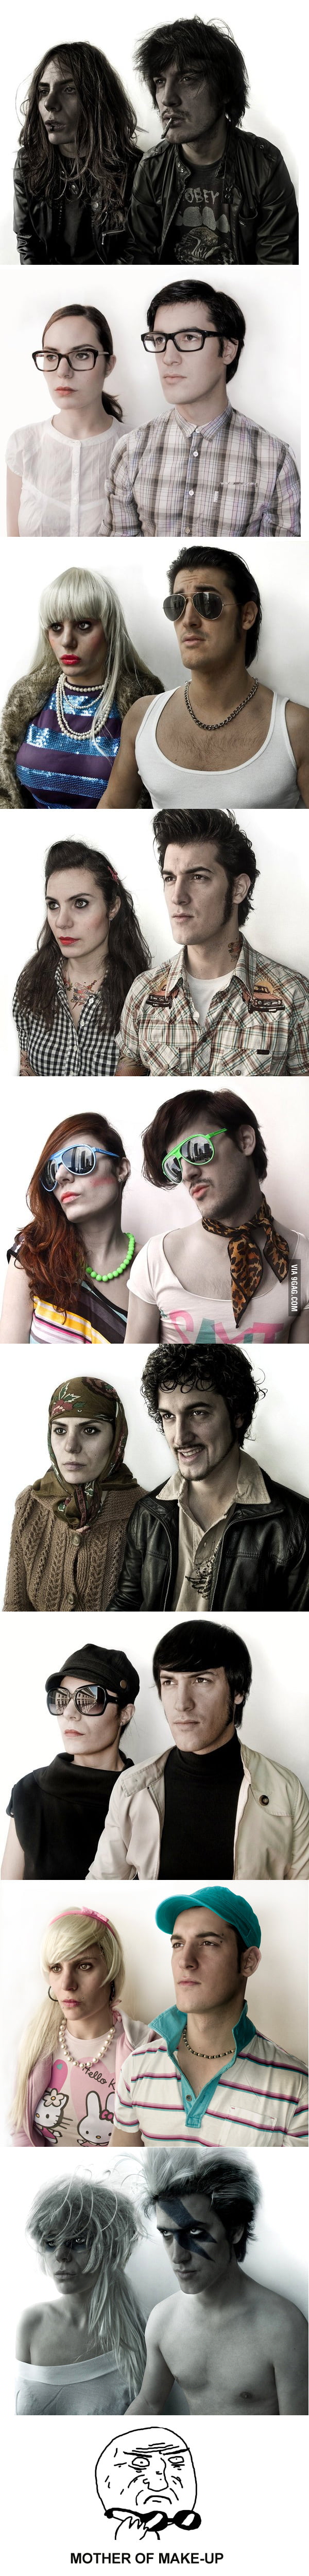 The same couple .. wait what? - 9GAG